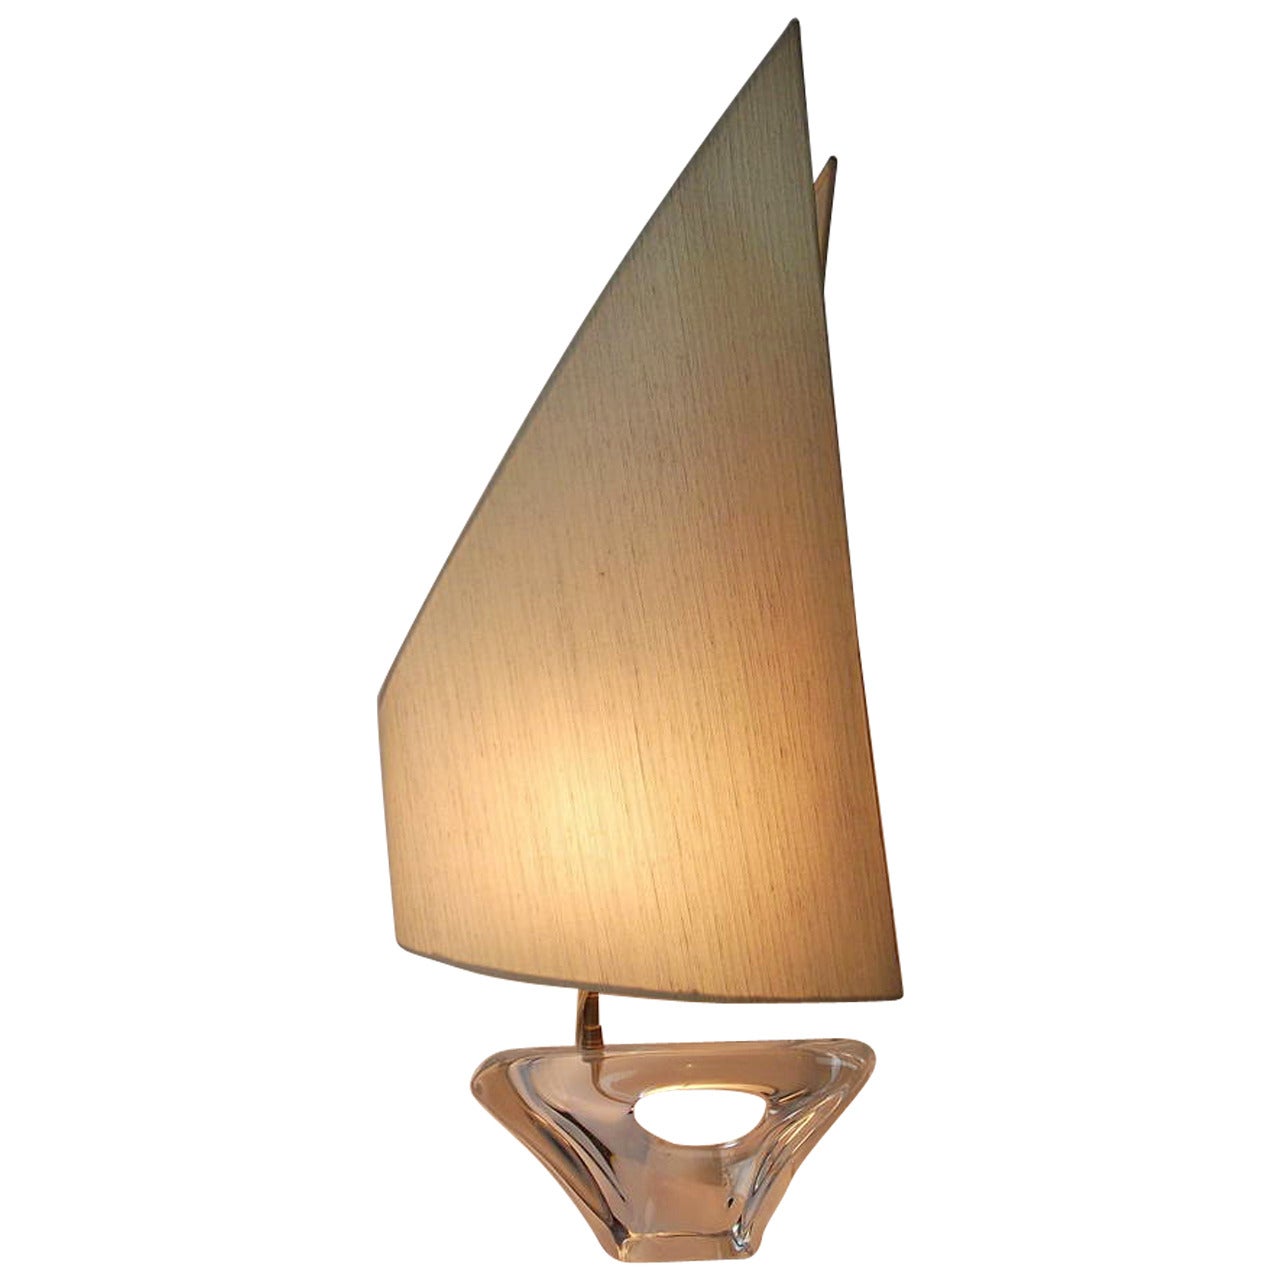 Rare "Ship" Lamp by Daum, France For Sale